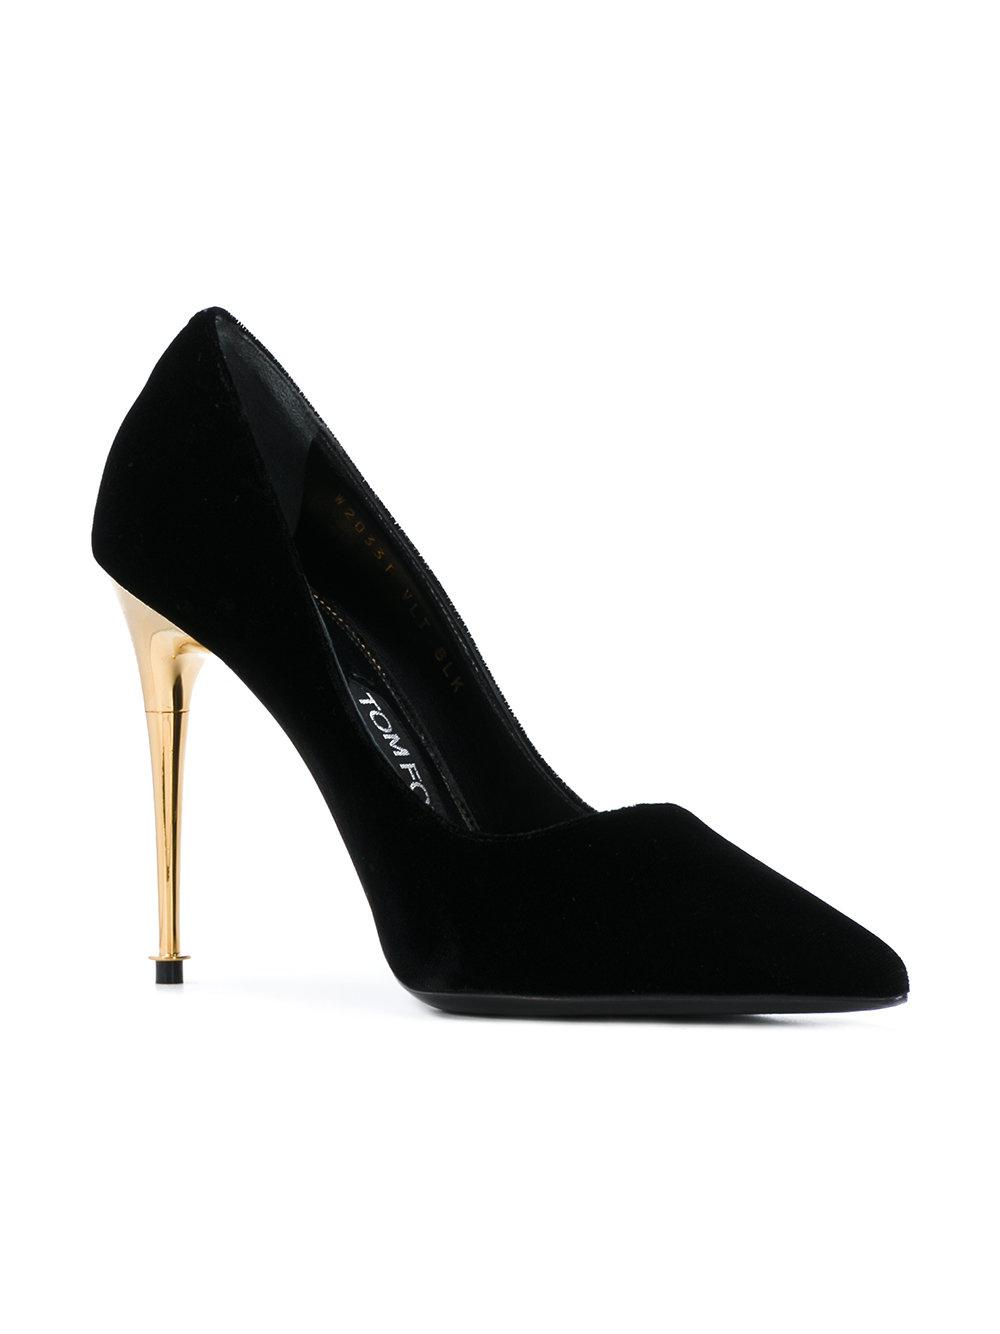 Introducir 74+ imagen tom ford black and gold heels - Abzlocal.mx